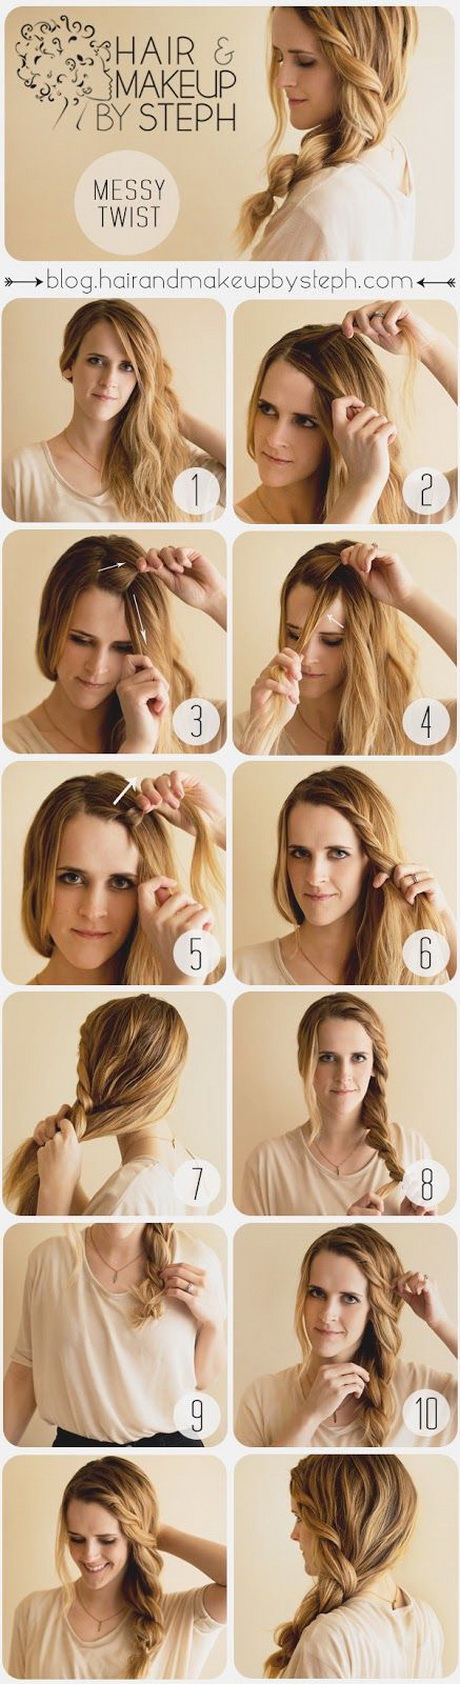 hairstyles-to-keep-hair-out-of-face-53_12 Hairstyles to keep hair out of face